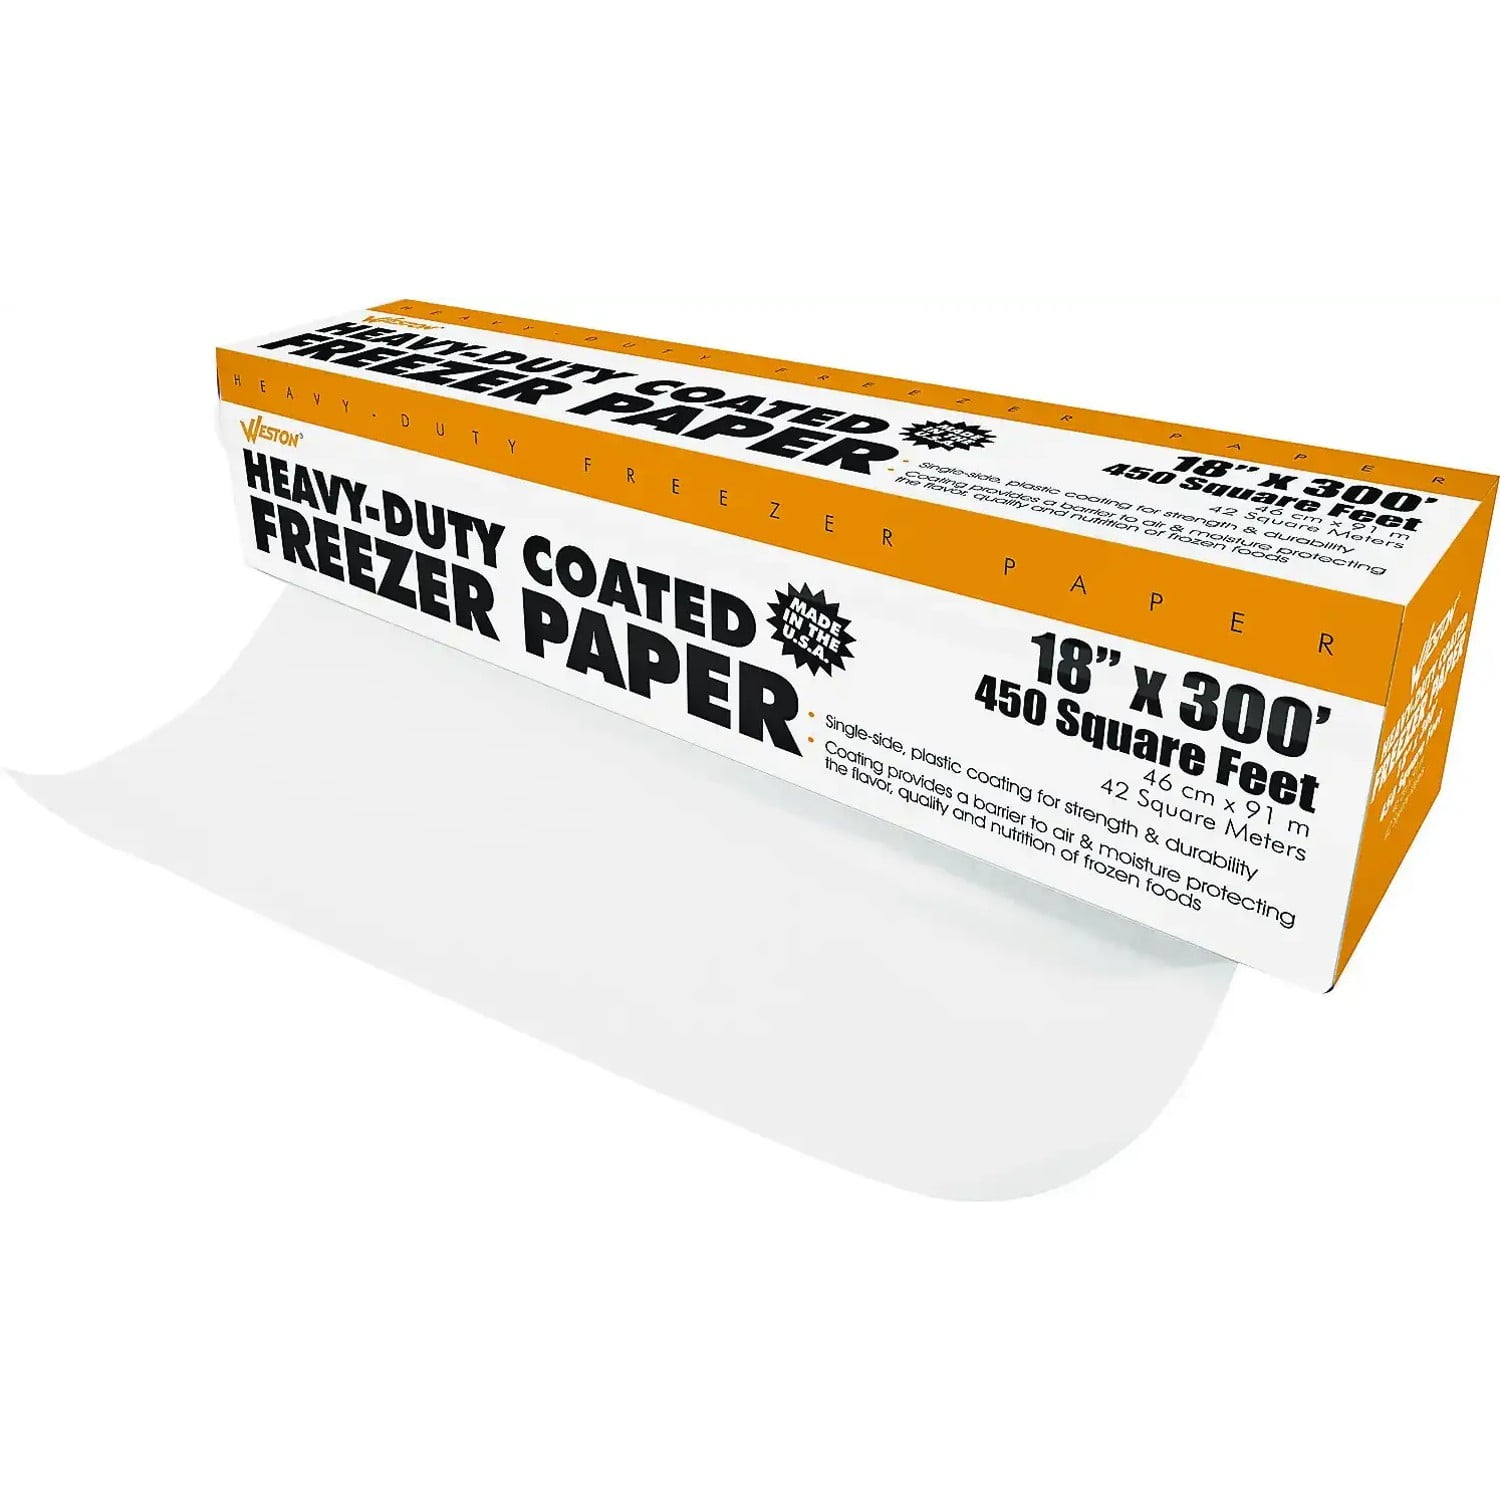 Reynolds Freezer Paper Plastic Coated 18 inch Total of 150 Sq ft Butcher Wrap